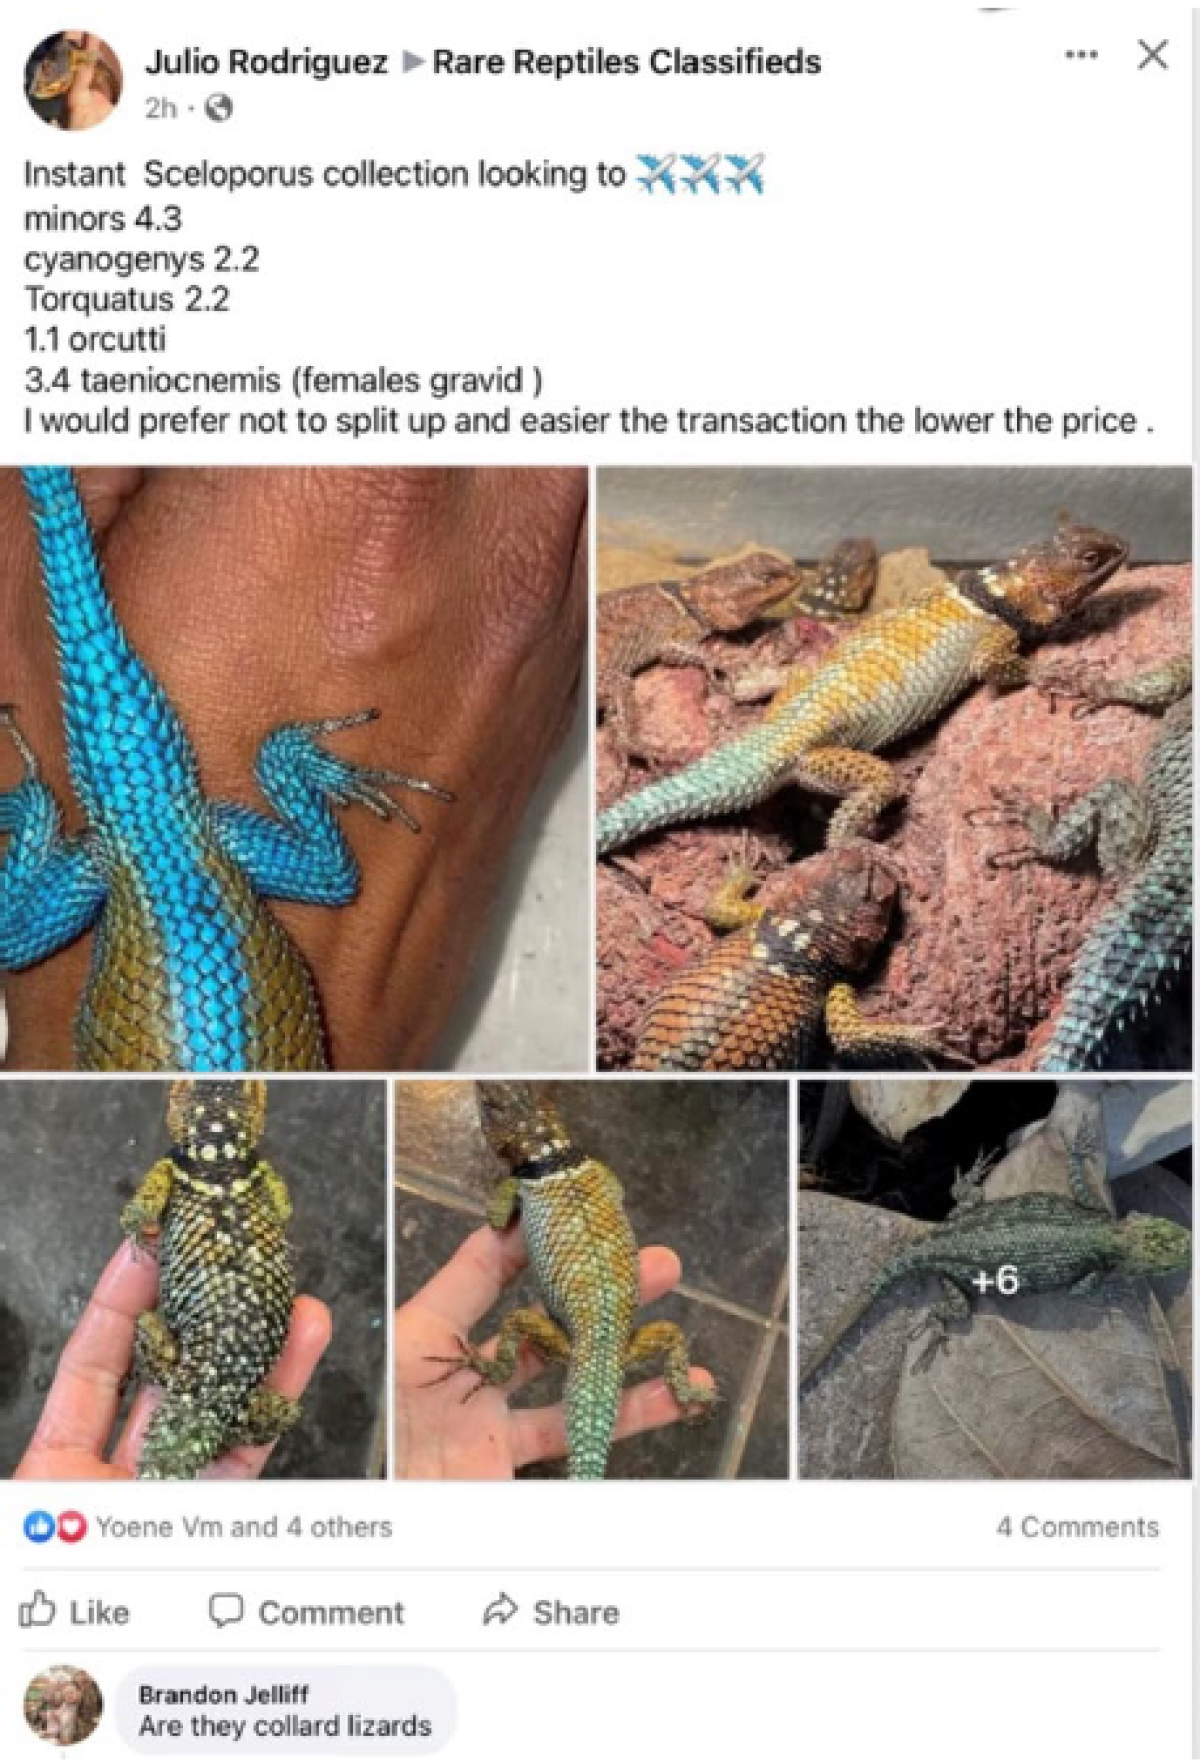 A Facebook ad shows rare lizards for sale by Julio Rodriguez, who federal investigators say is Jose Manuel Perez.